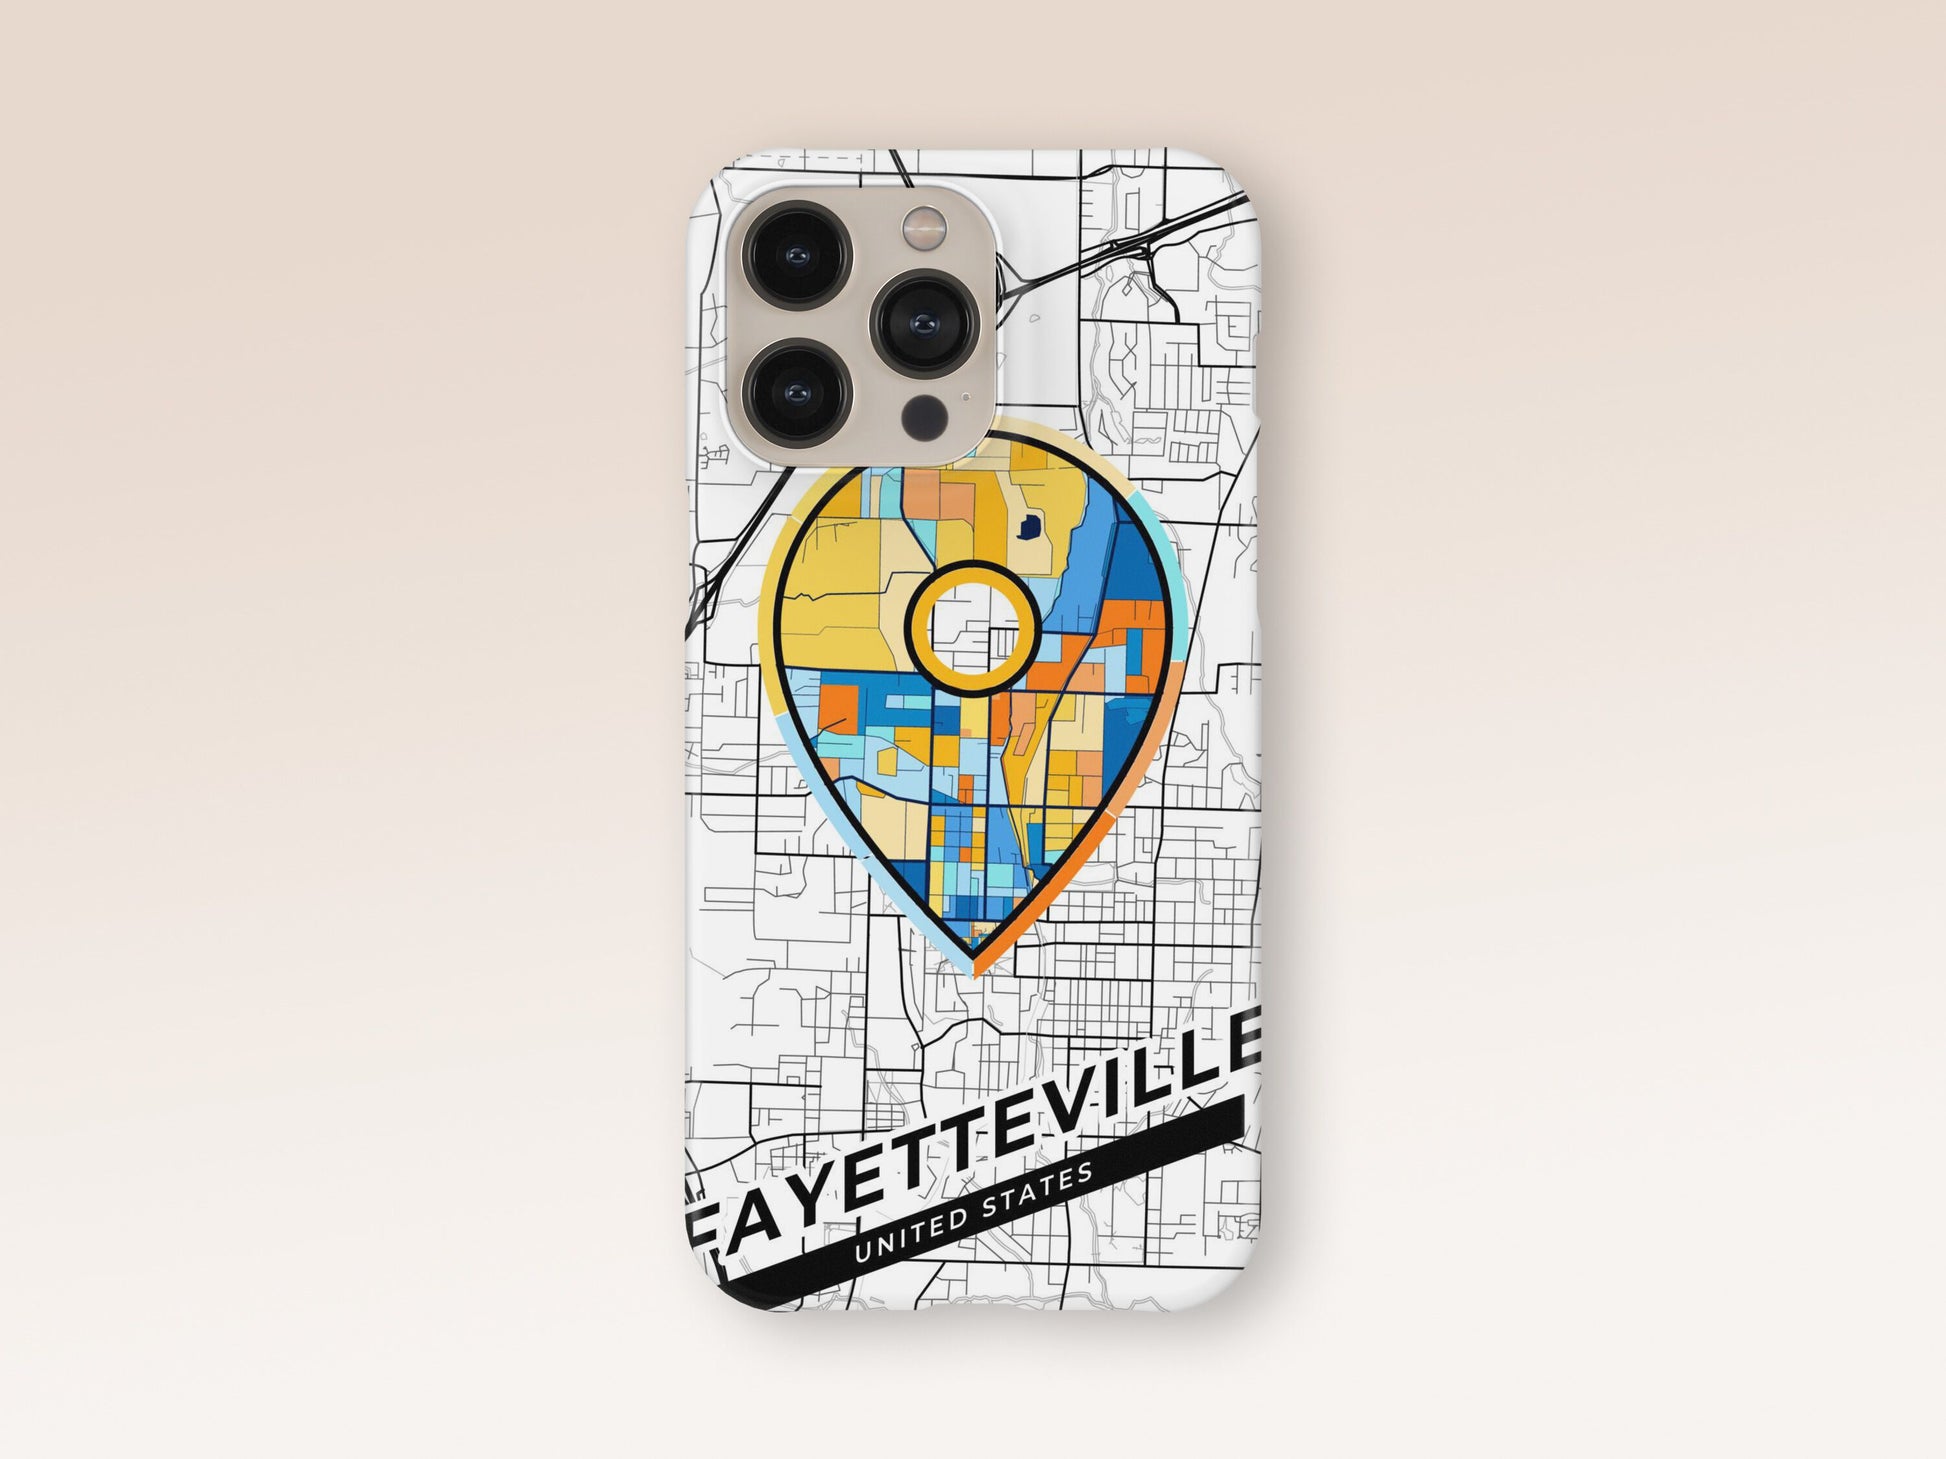 Fayetteville Arkansas slim phone case with colorful icon. Birthday, wedding or housewarming gift. Couple match cases. 1